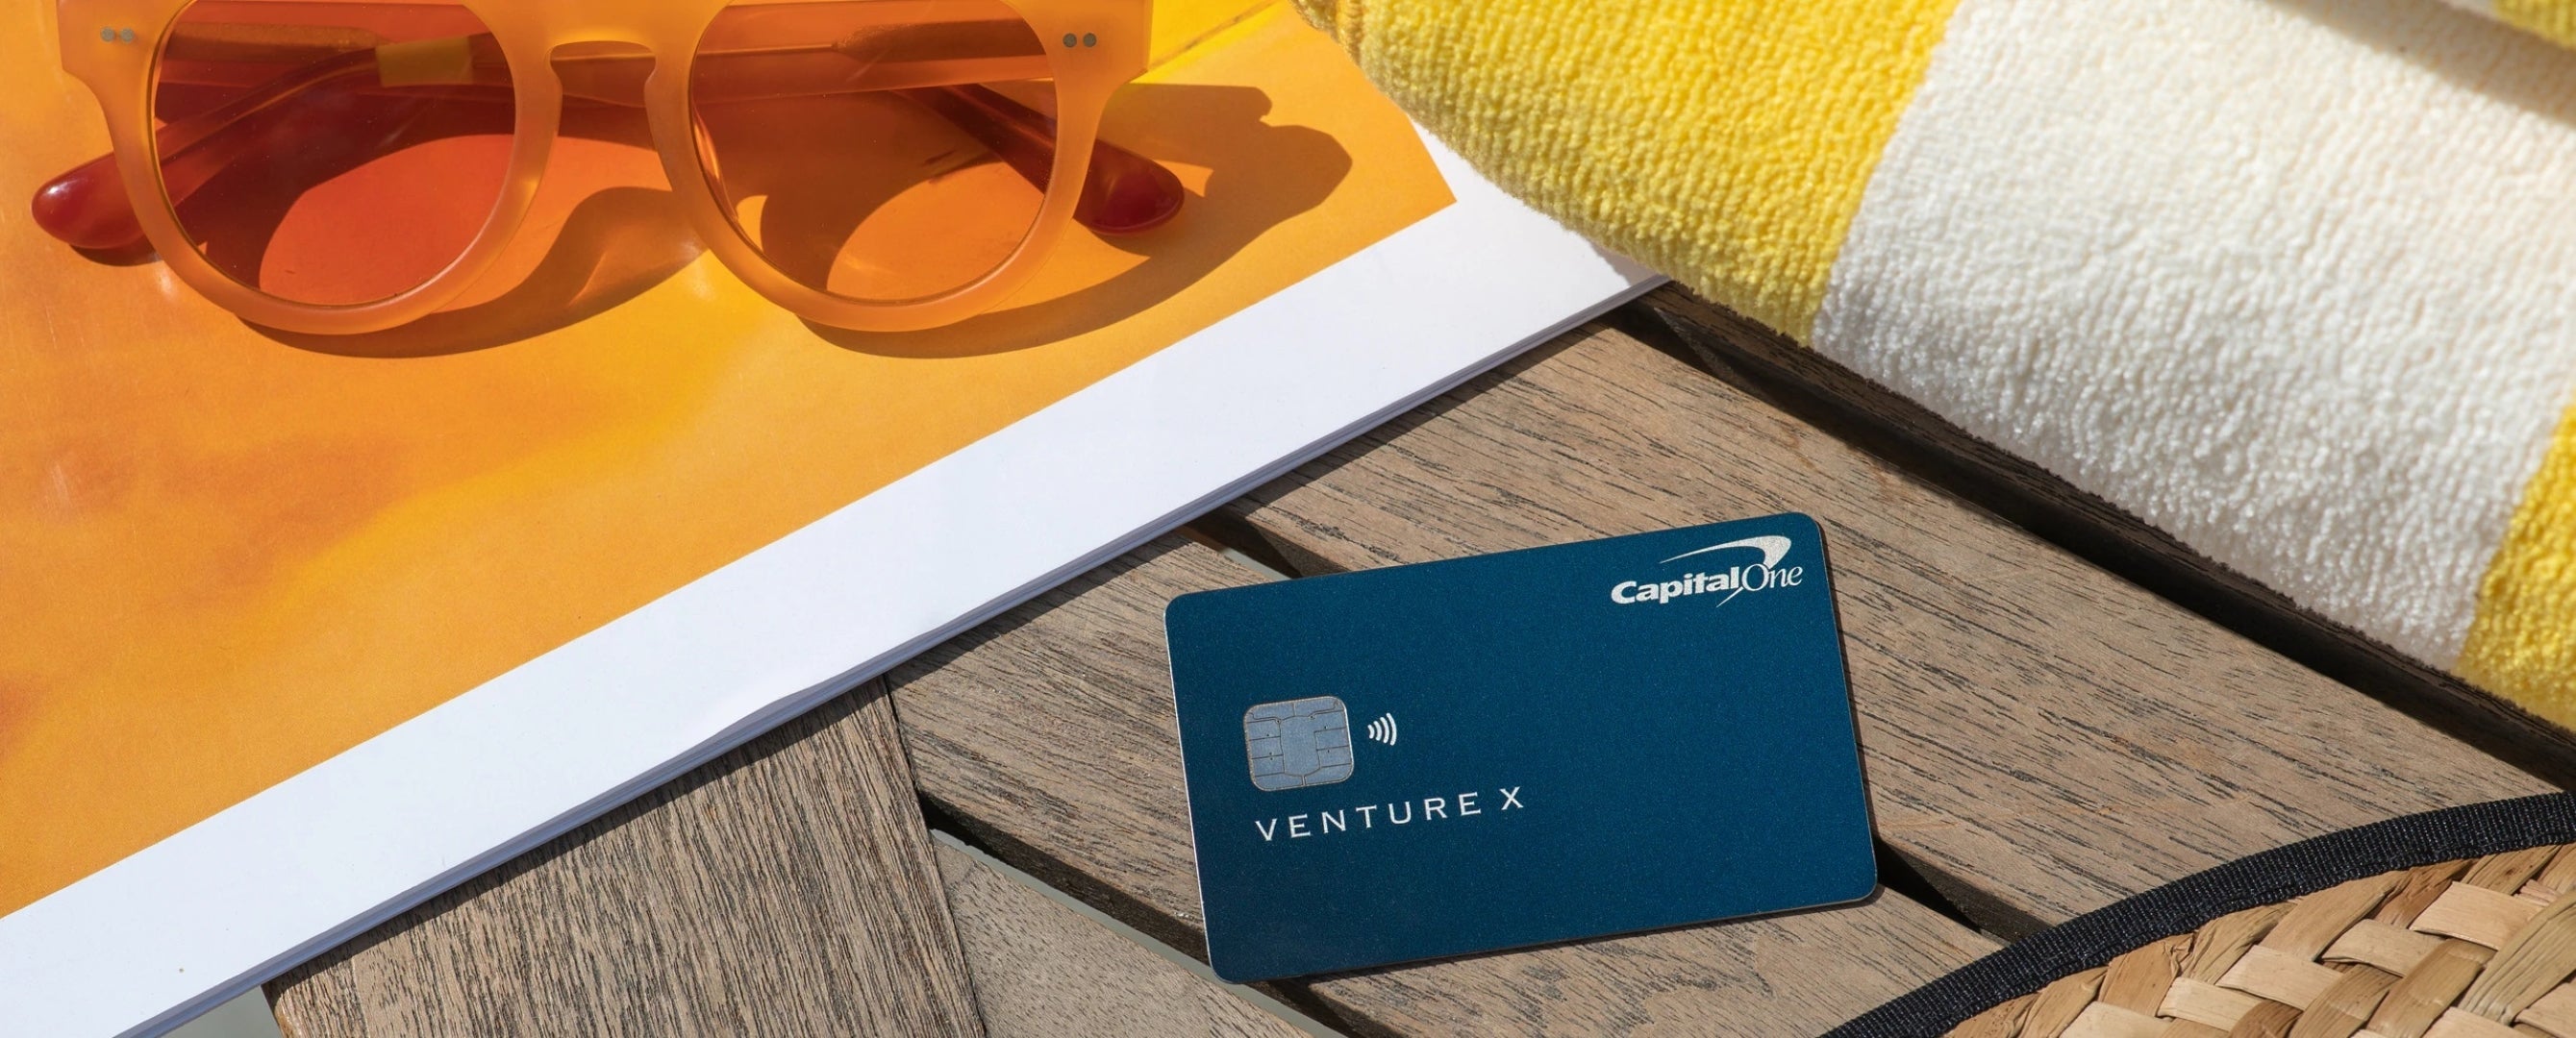 Capital One Venture X with sunglasses and towel